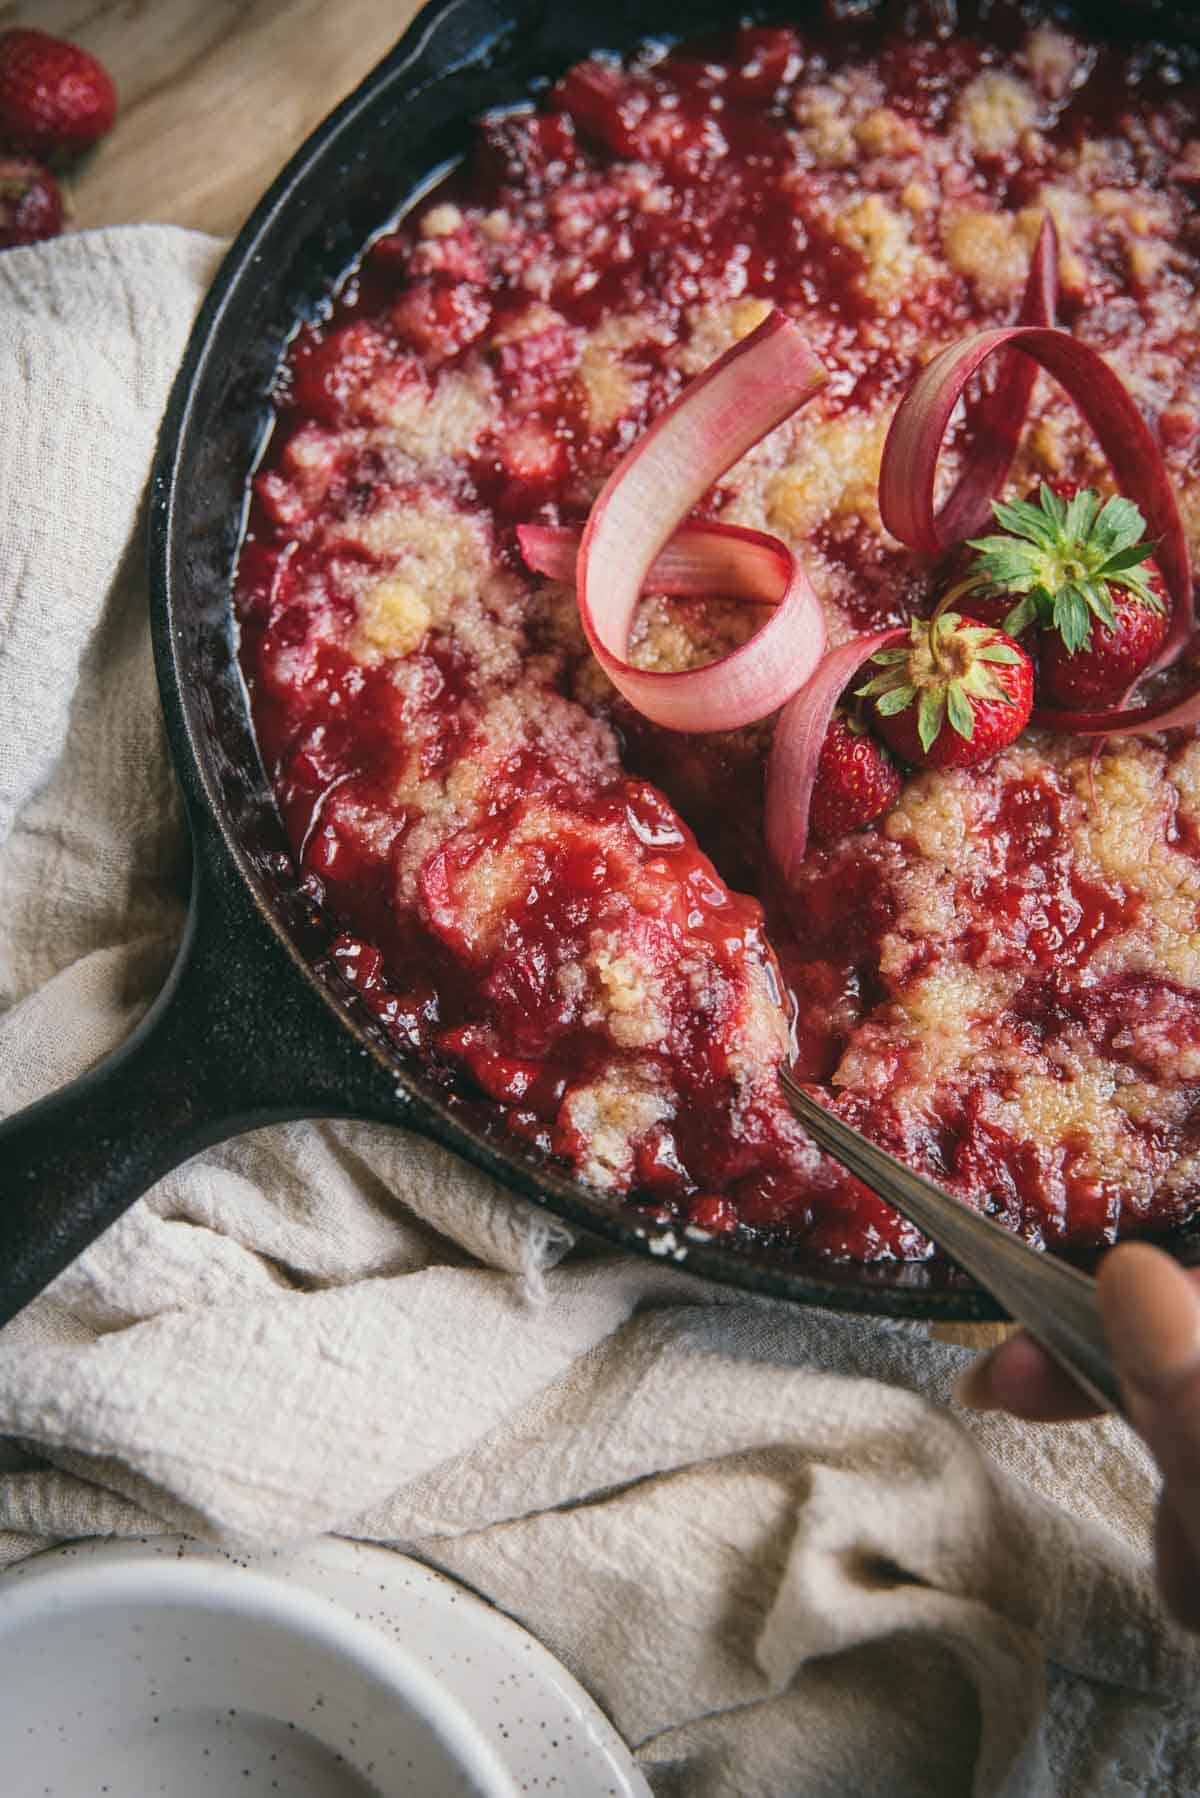 spoon scooping fruit crumble out of a cast iron pan that is on top of a linen napkin